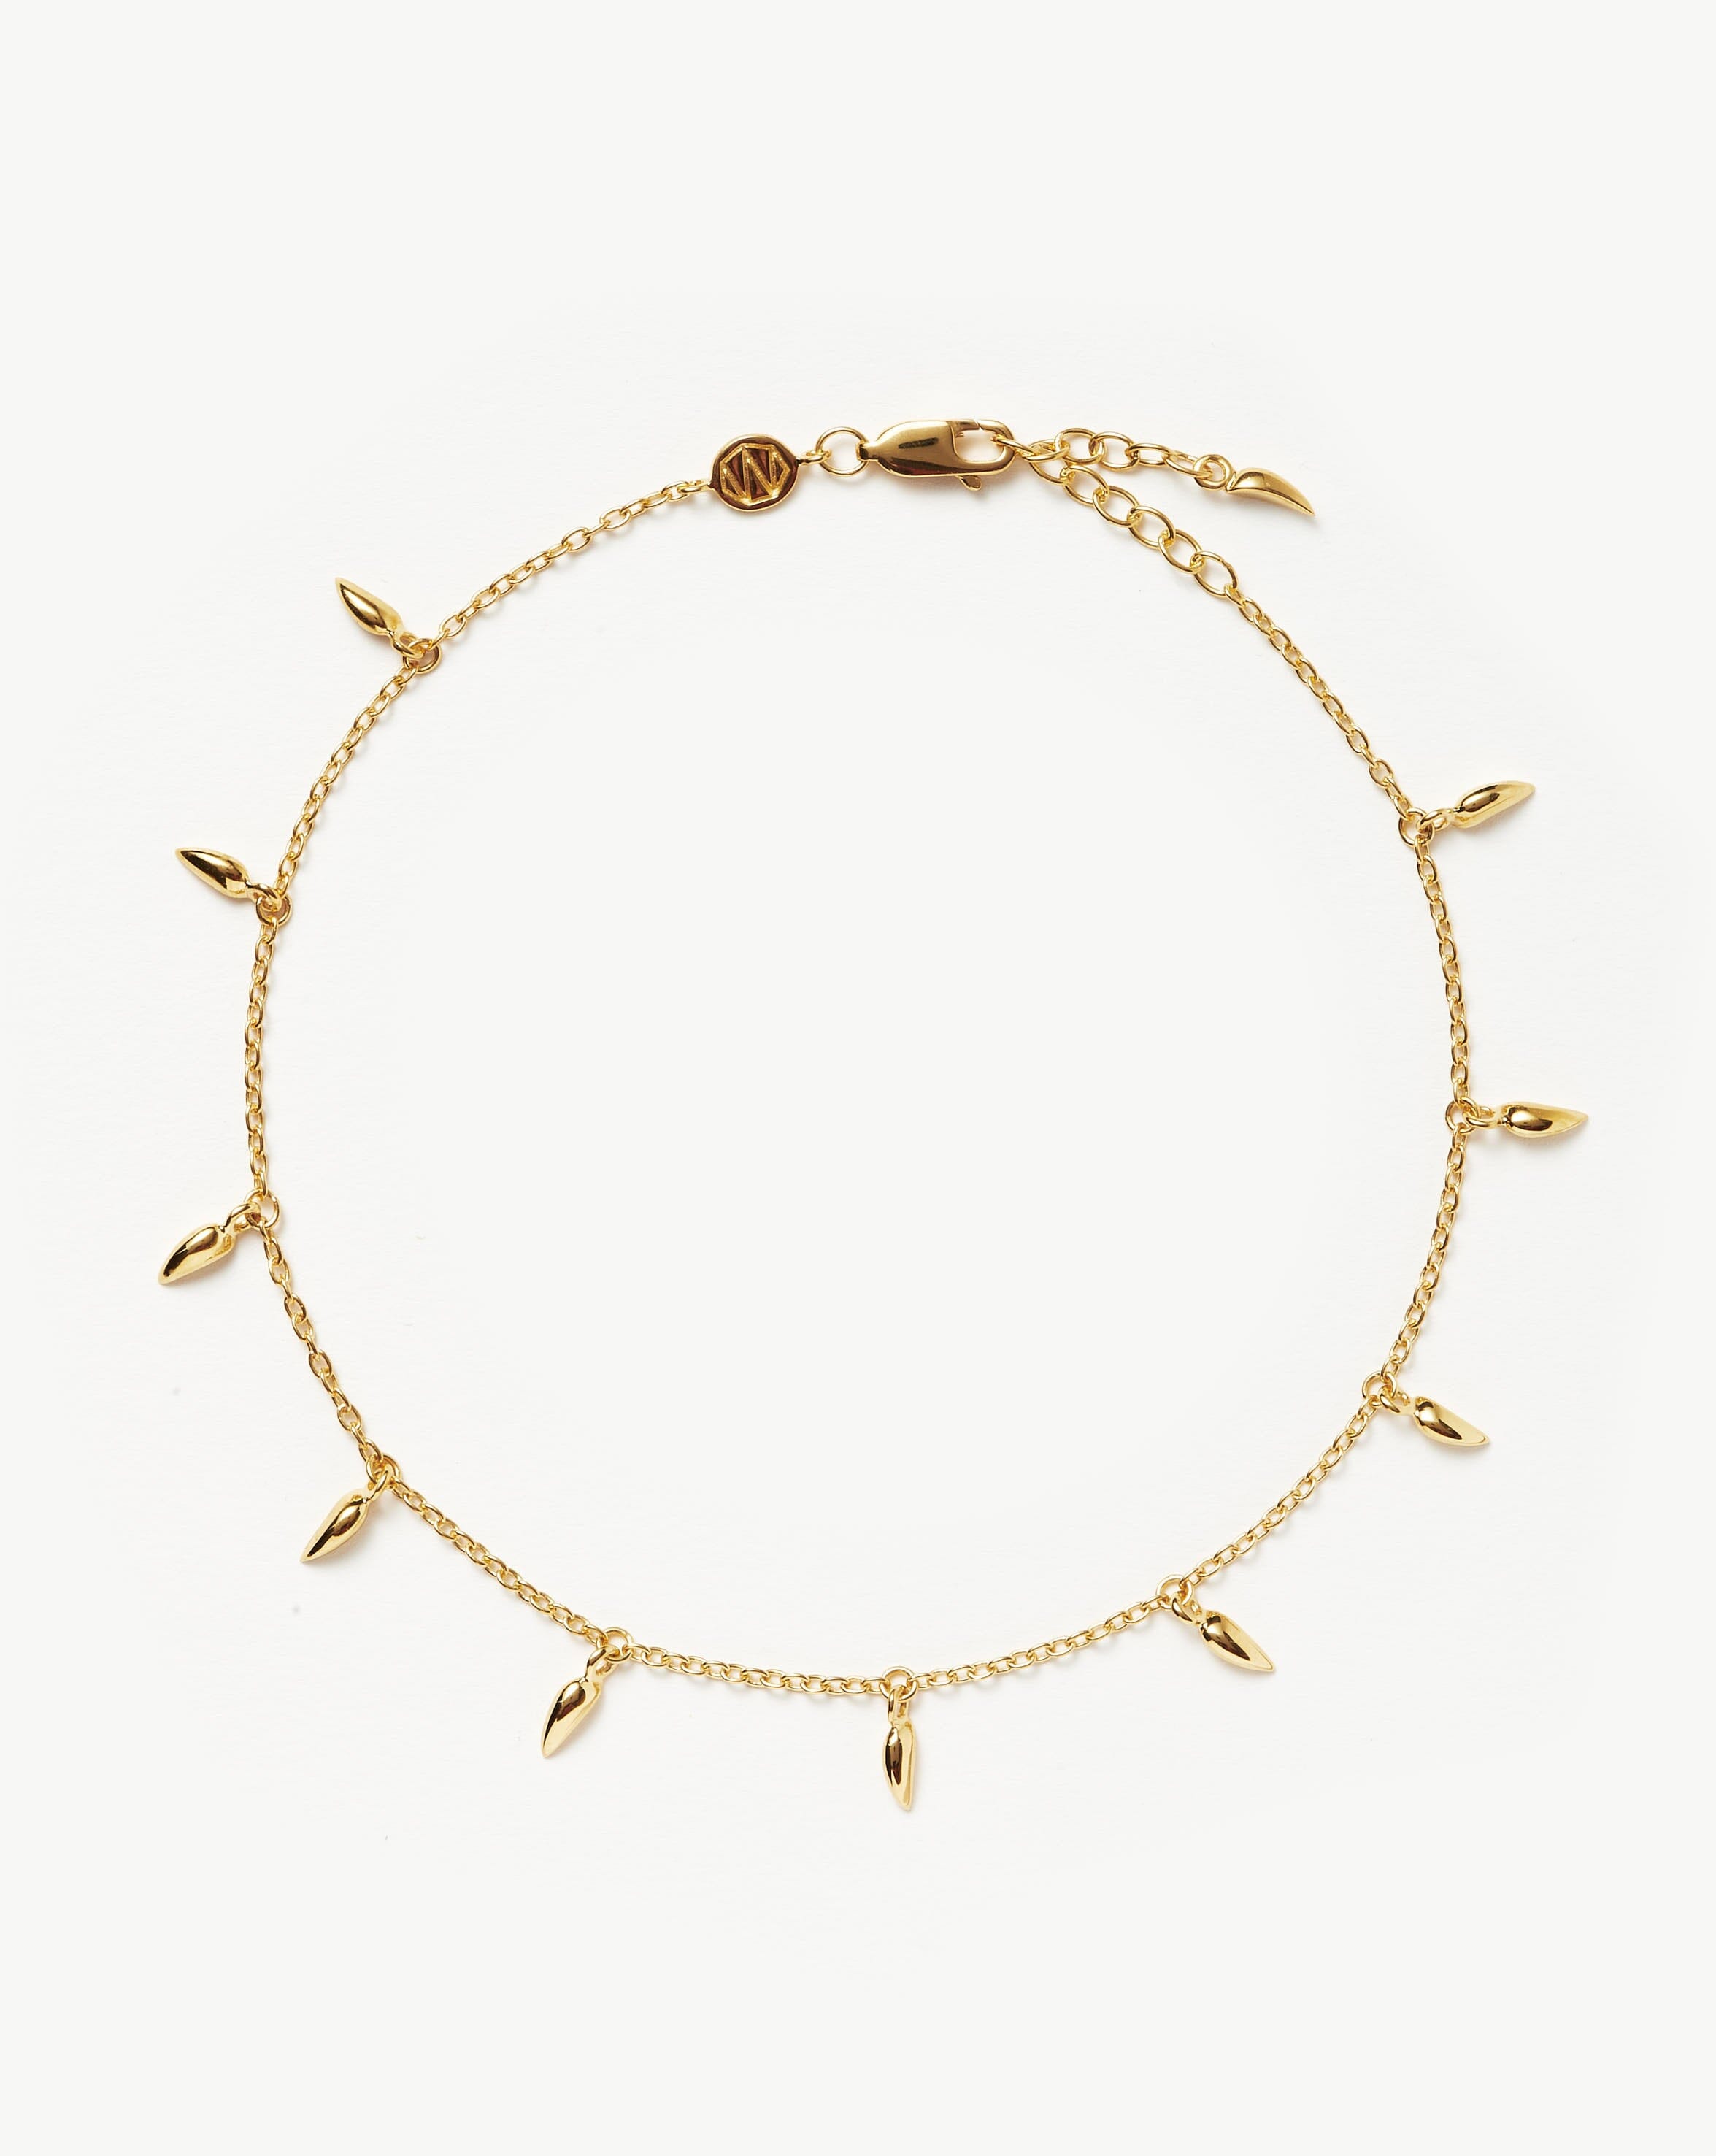 Lucy Williams Mini Fang Anklet Anklets Missoma 